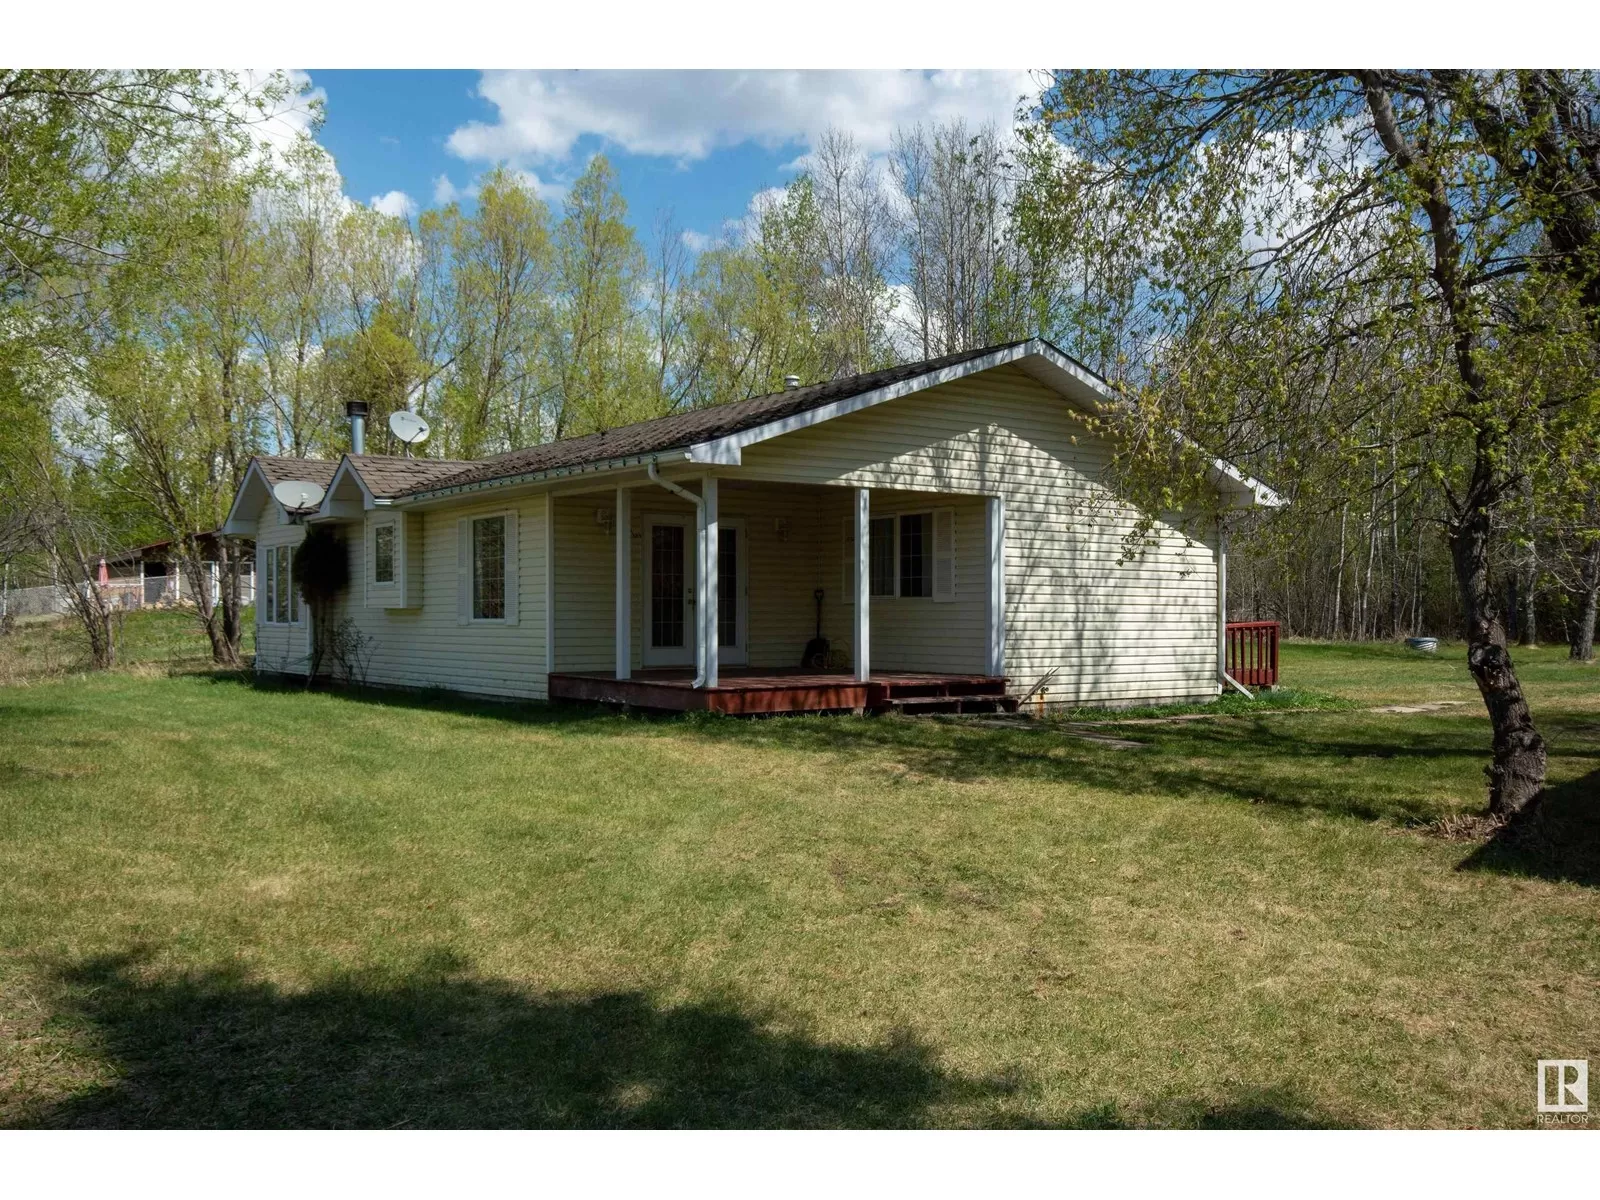 House for rent: 103/104 60032 Sec Hwy 867, Rural St. Paul County, Alberta T0A 1A0